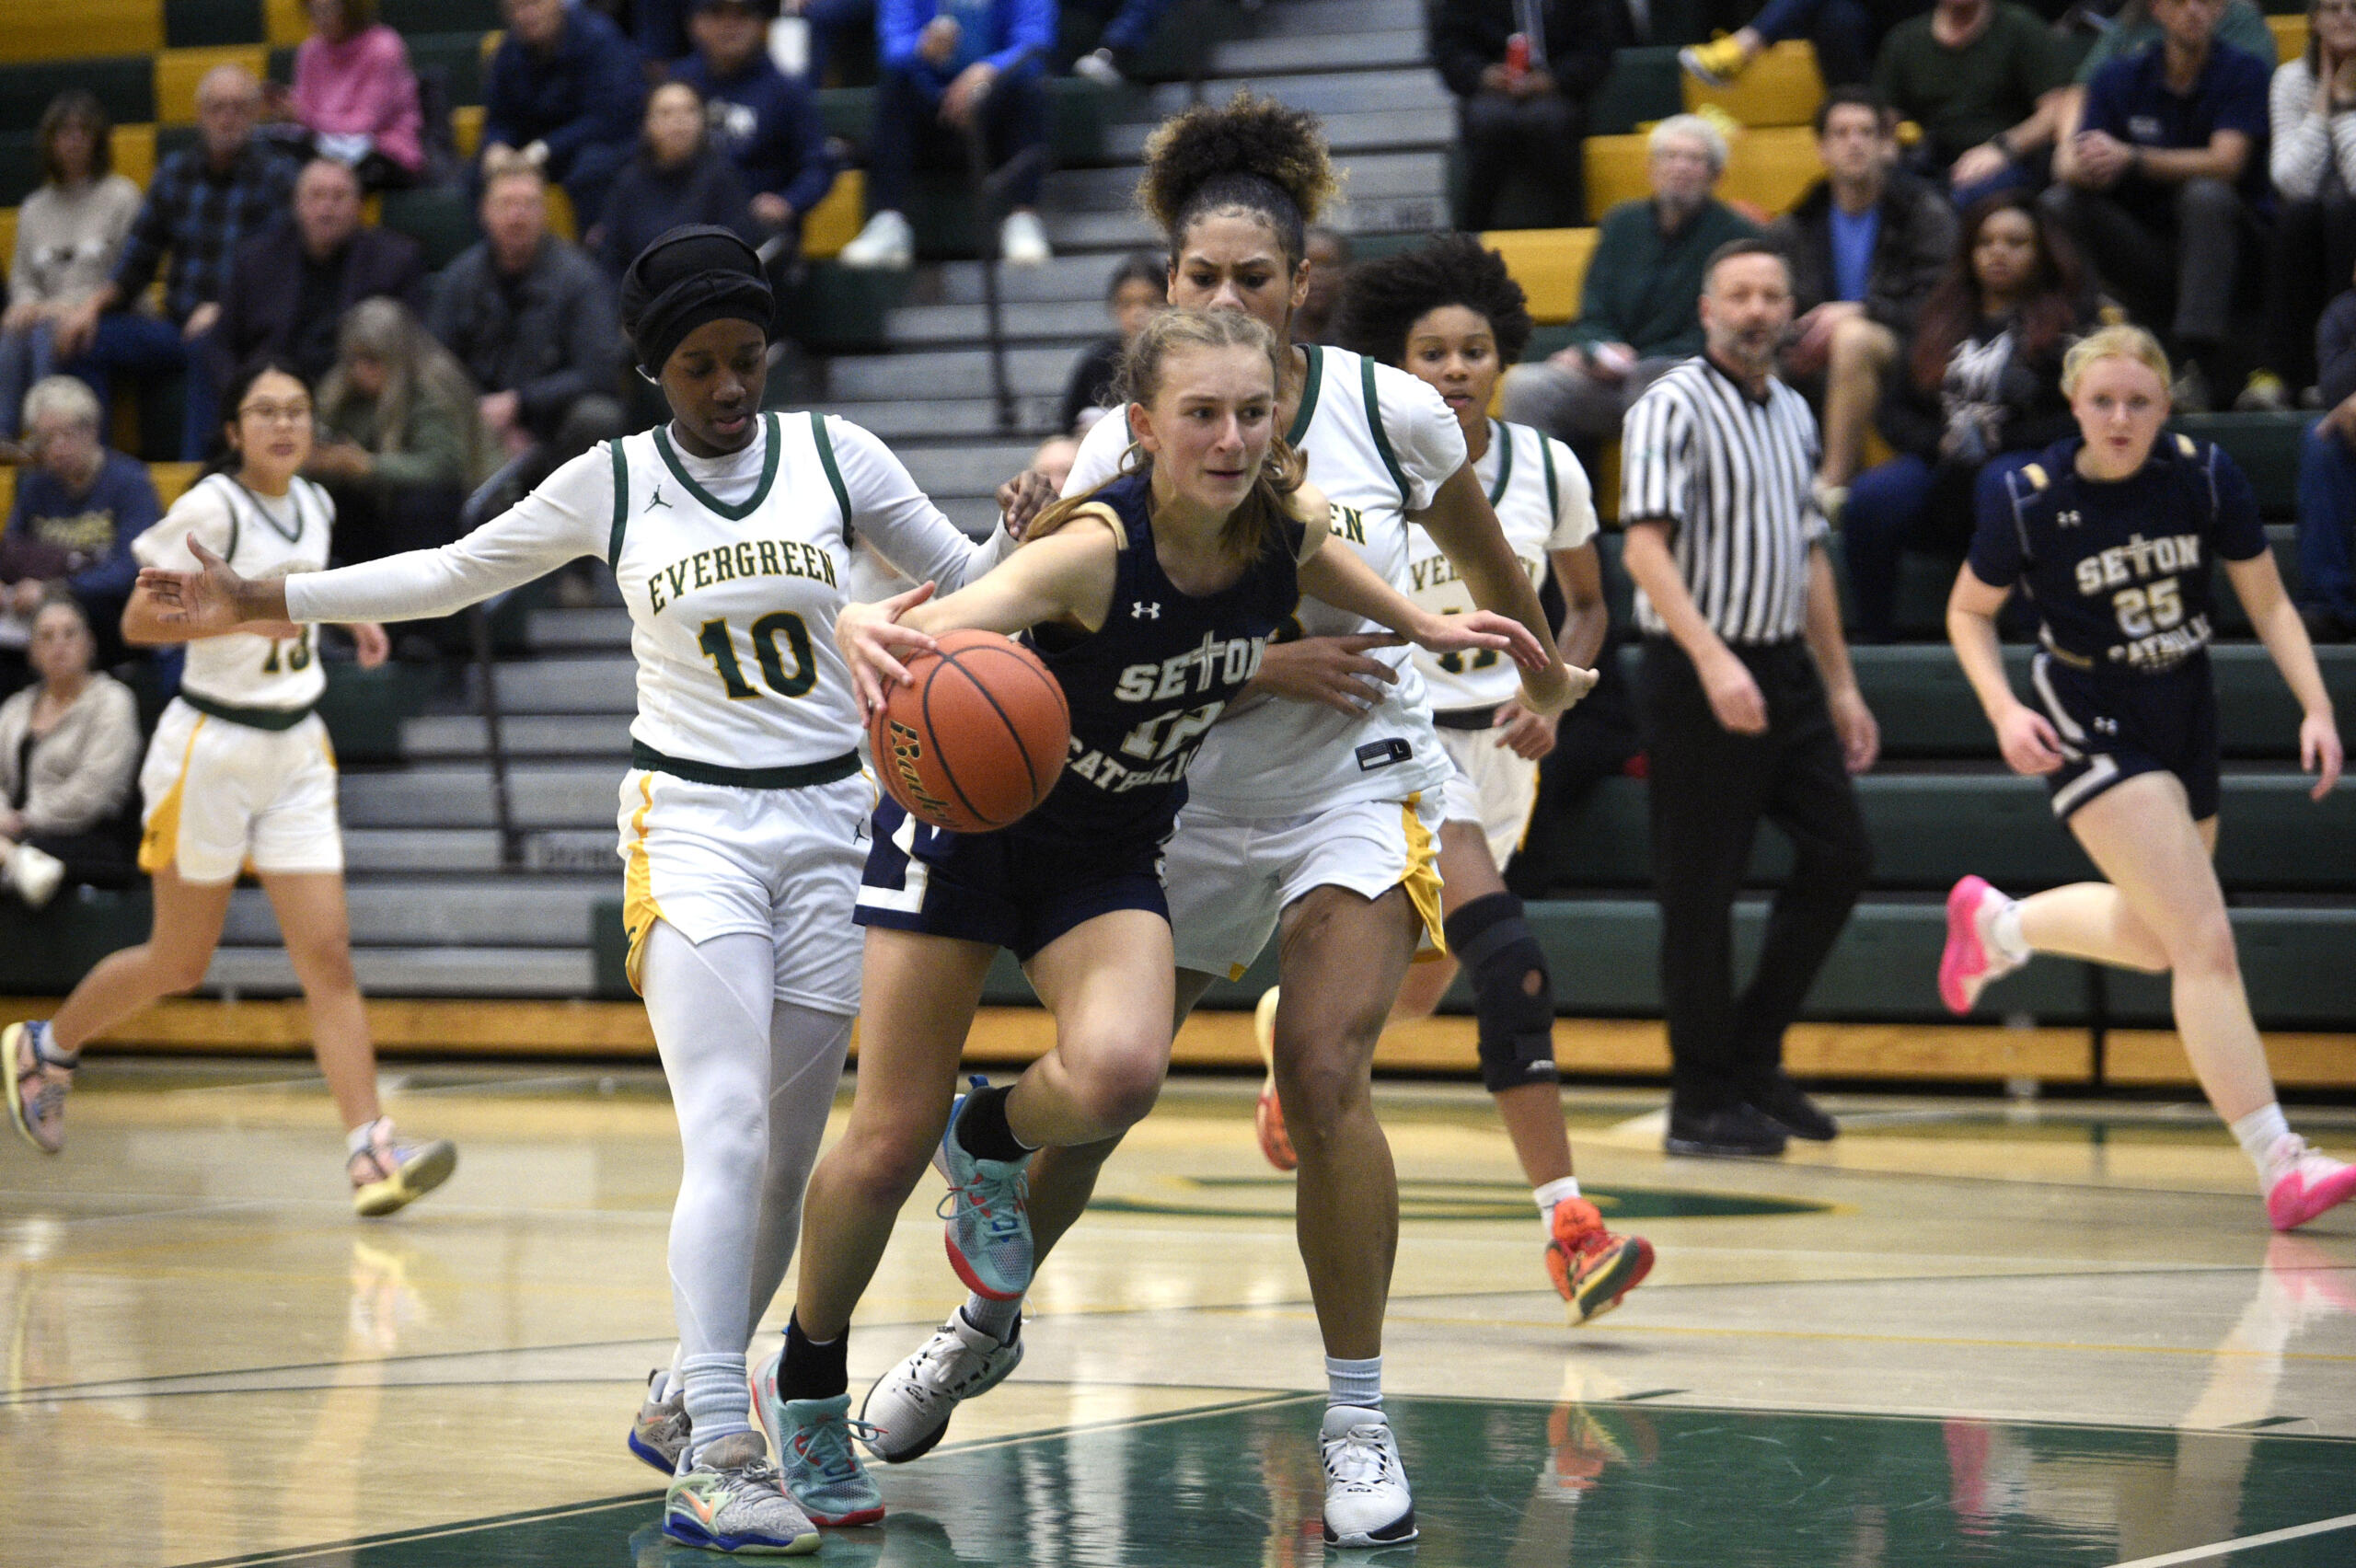 Seton Catholic’s Remy Jenniges (12) goes between Evergreen defenders Fatima Juwara, left, and Alexis Echols, right, during a non-league girls basketball game on Tuesday, Dec. 5, 2023, at Evergreen High School.